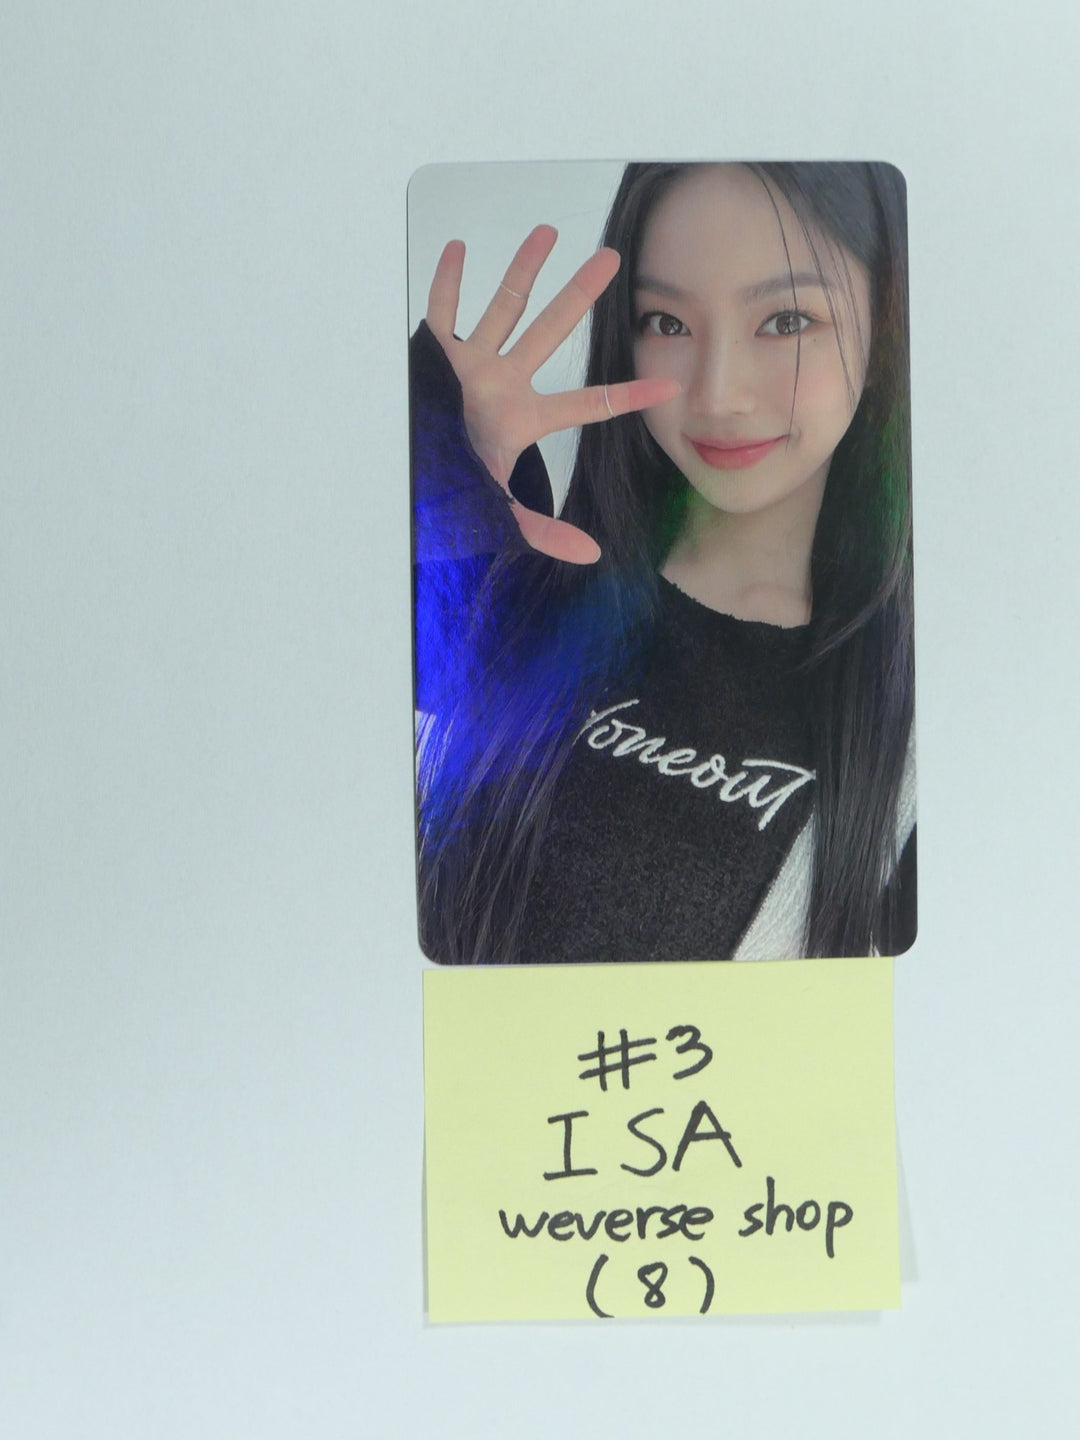 StayC 'YOUNG-LUV.COM' - Weverse Shop Pre-Order Benefit Hologram Photocard [Updated 2/24]